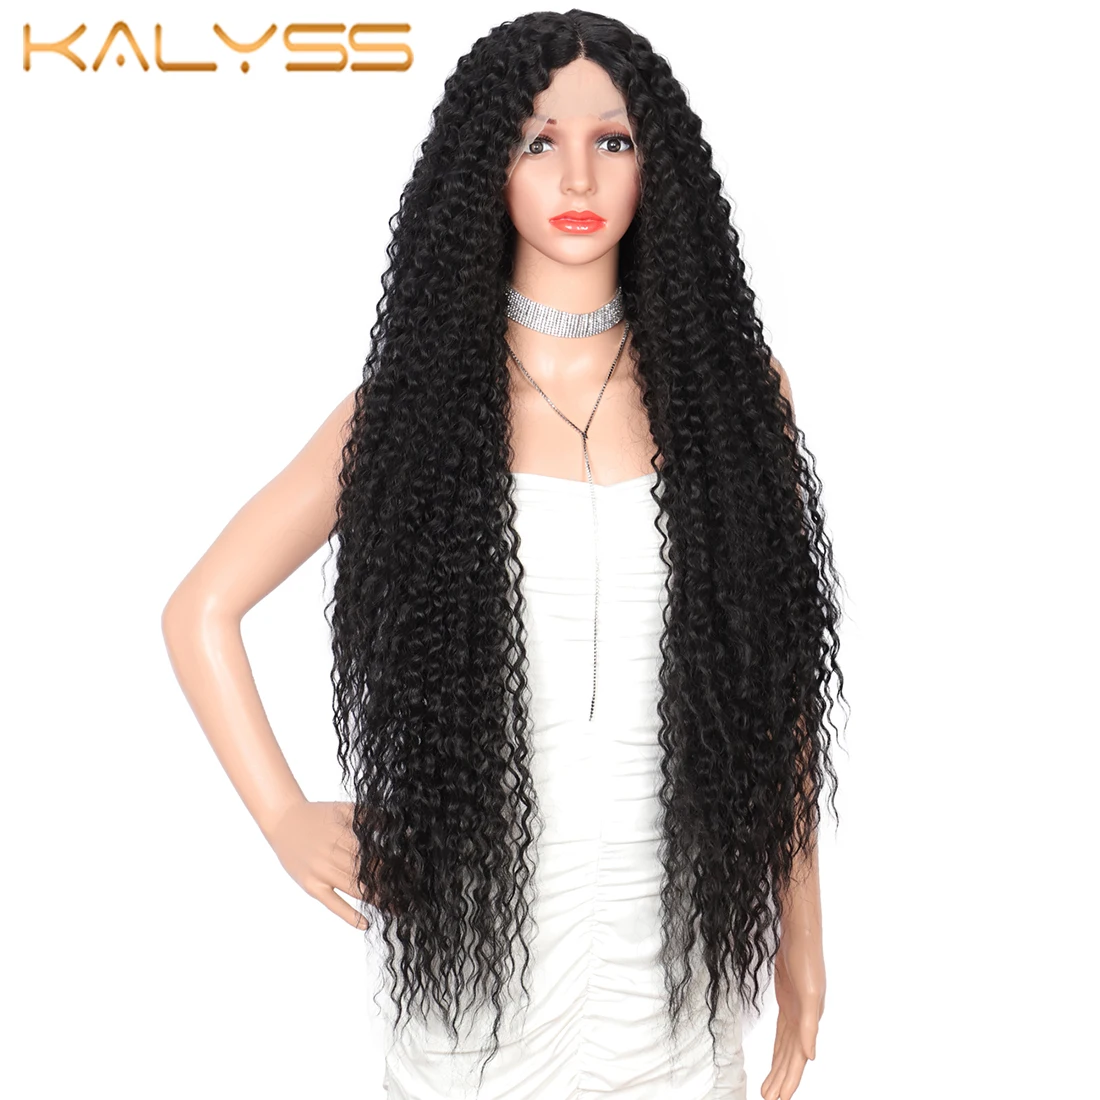 Kalyss Super Long Curly Lace Front Wigs For Black Women 38 Inches Long Deep Wave Wigs Natural Looking Synthetic Wig